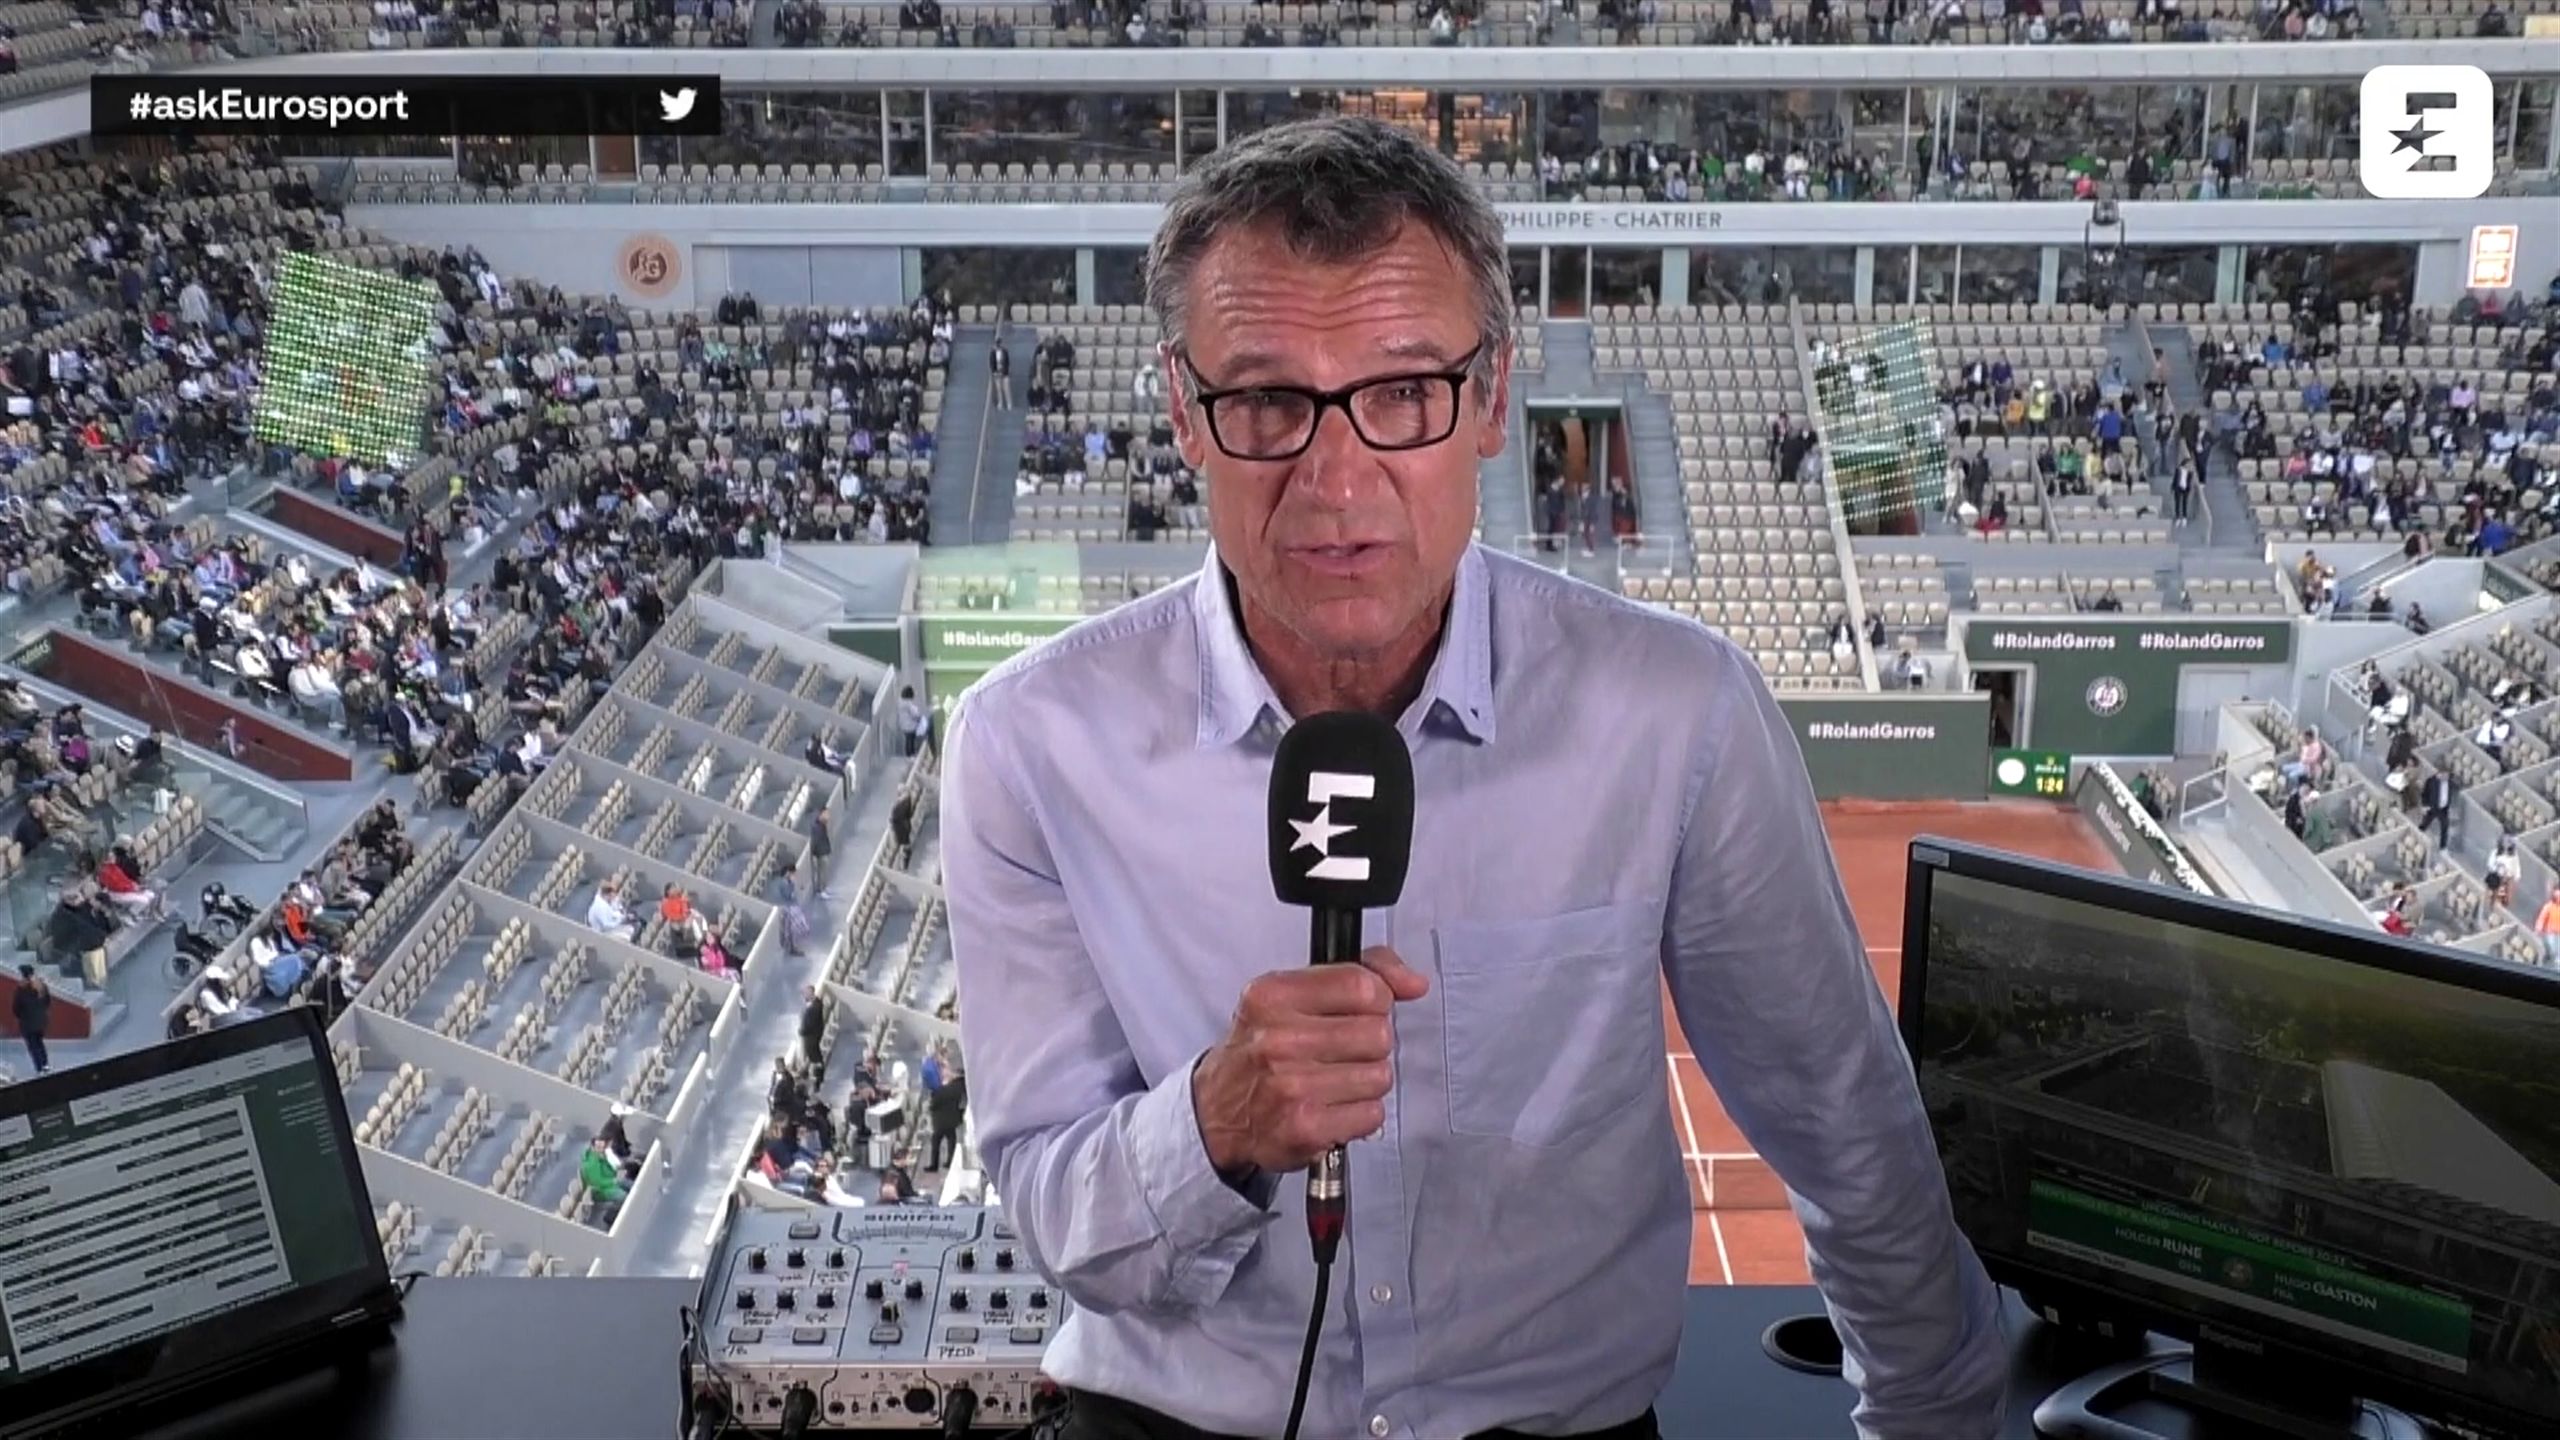 French Open 2022 Without a doubt yes! - Mats Wilander explains why nights at Roland Garros are unique - Tennis video